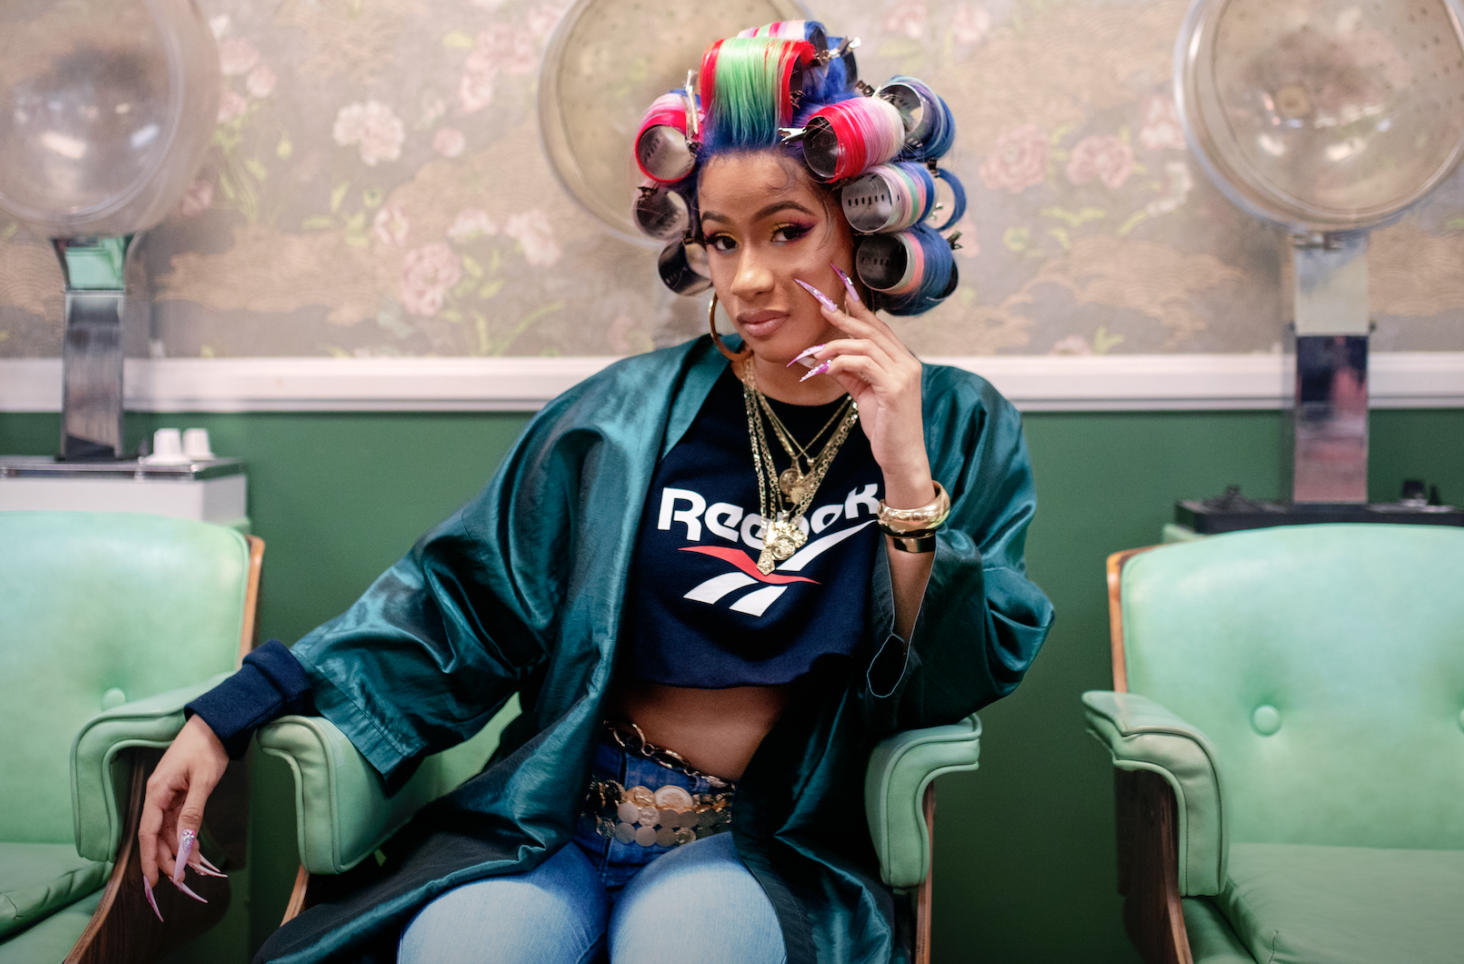 cardi-b-reebok-commercial-nails-sport-the-unexpected-campaign-campaign-july-2019-sneakers-salon